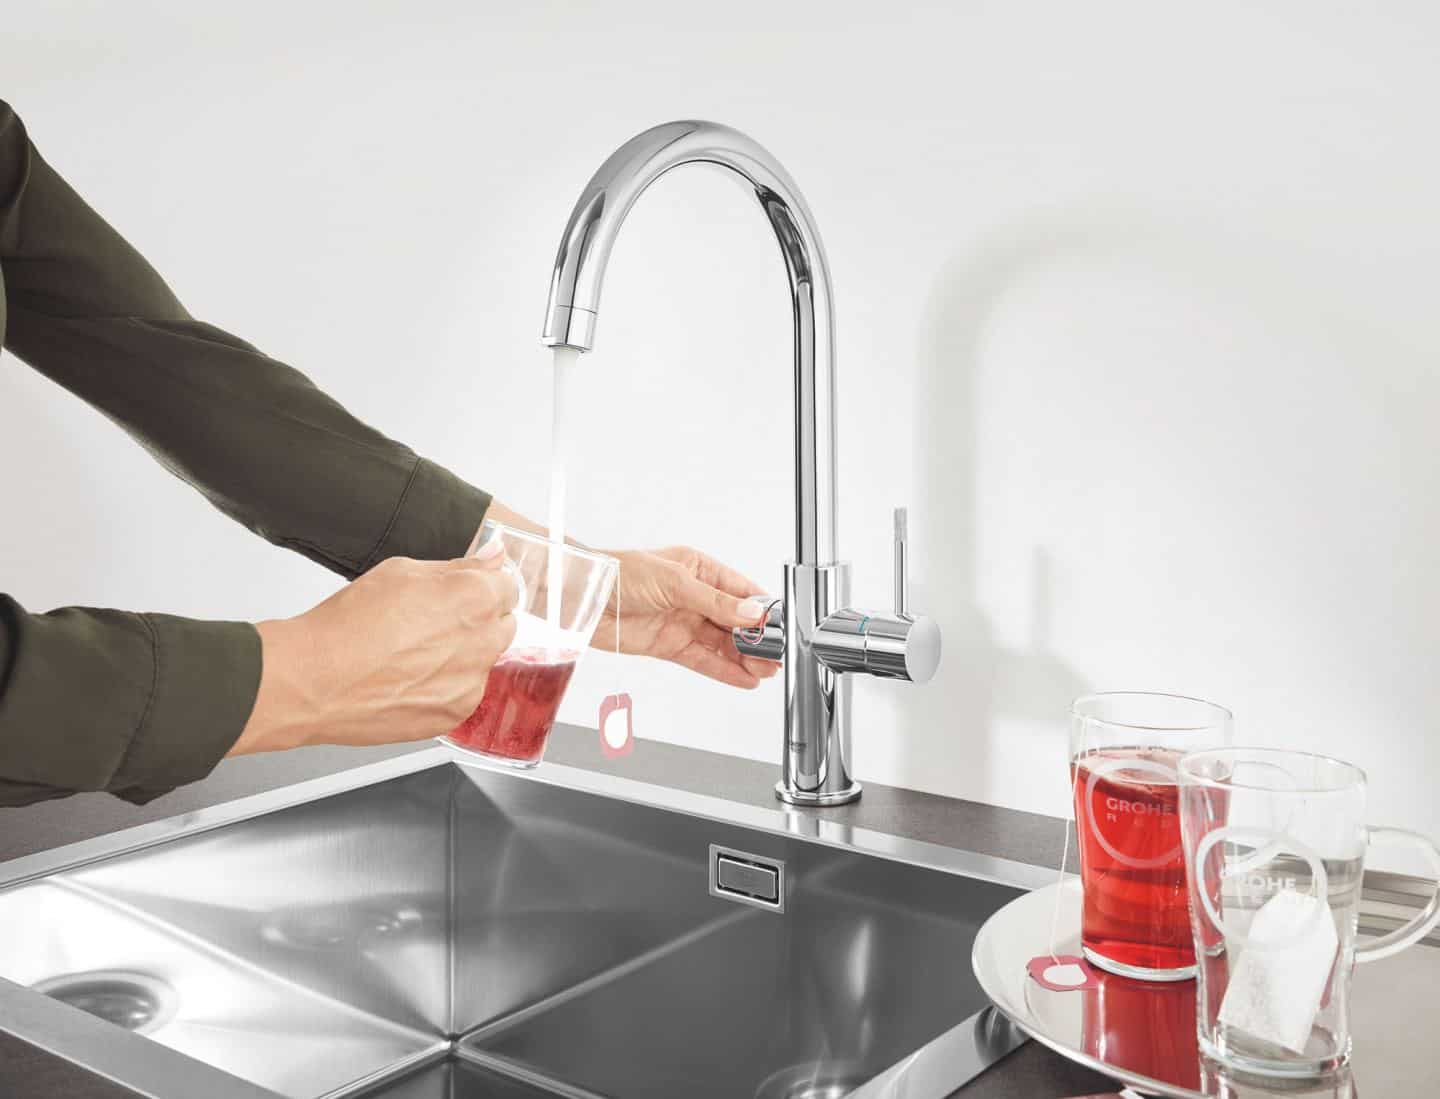 Kitchen design trends - Kettle hot water tap by Grohe